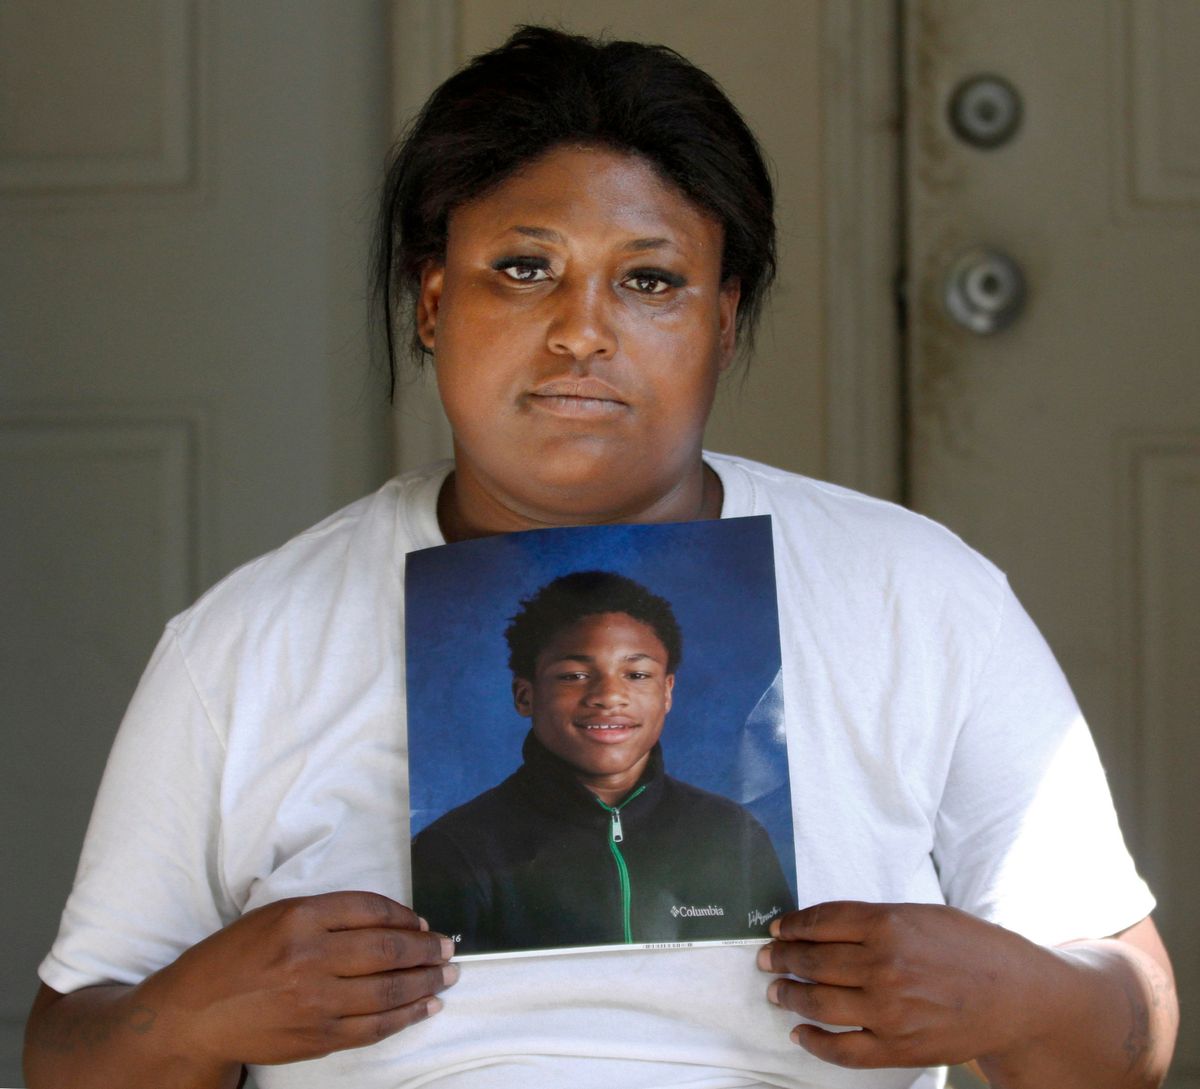 In this Sept. 7, 2016 photo, Monique Causey holds a portrait of her 14-year-old Malik, who was shot on Aug. 21, 2016, at her home in Chicago. August was the deadliest month for Chicago homicides in two decades, and an analysis of the toll shows more clearly than ever that the blame lies with surging violence in a handful of the city’s most impoverished neighborhoods riven by loosely organized street gangs. (AP Photo/Tae-Gyun Kim) (AP)